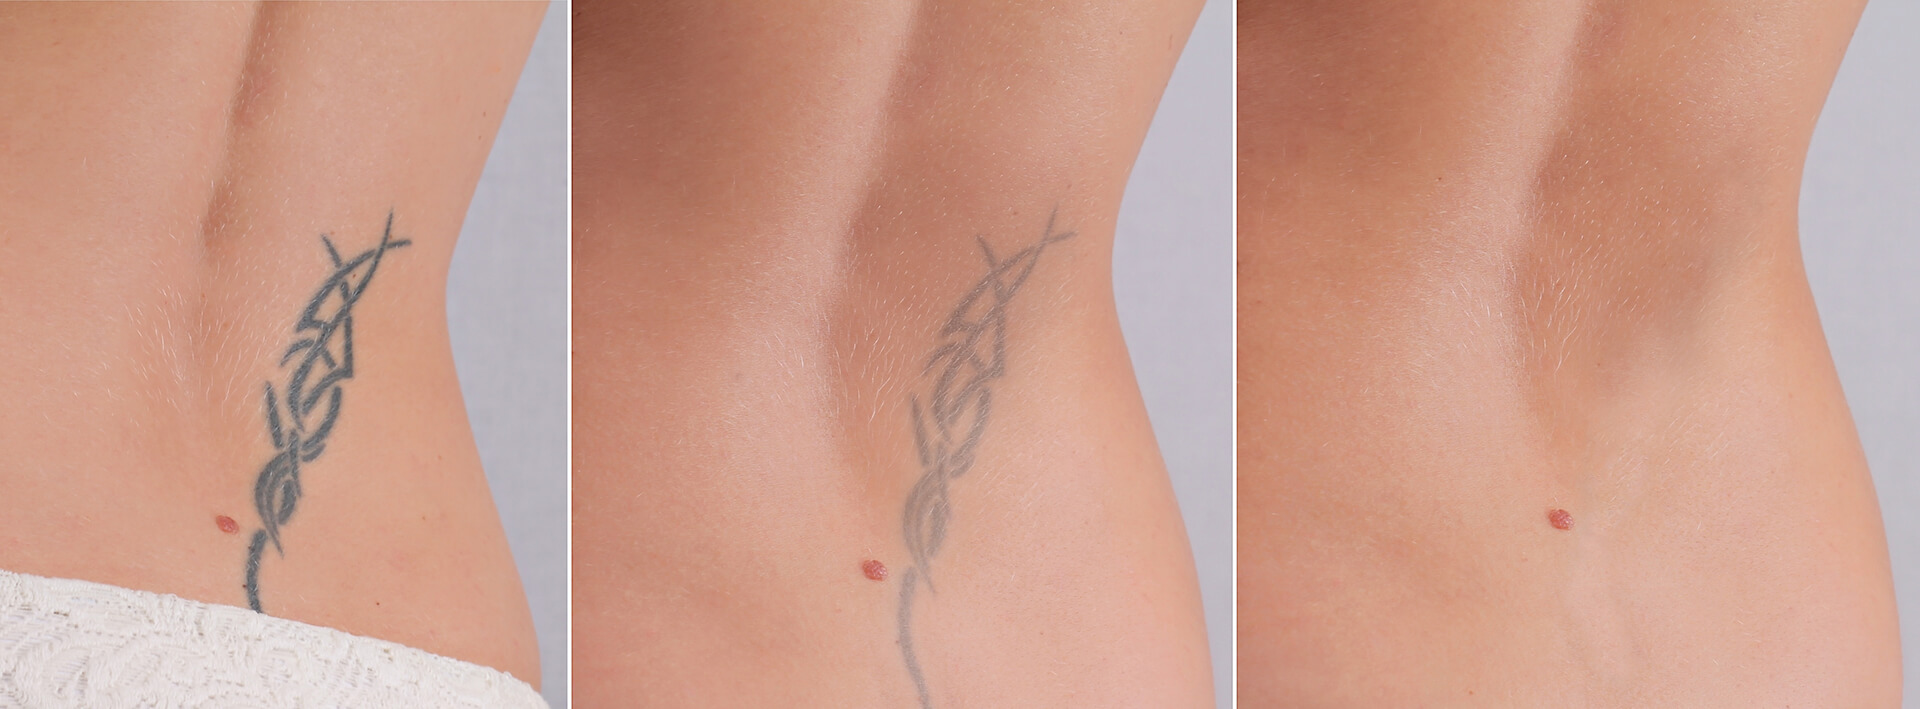 Laser Tattoo Removal Chesterfield, MO - Laser Surgery USA